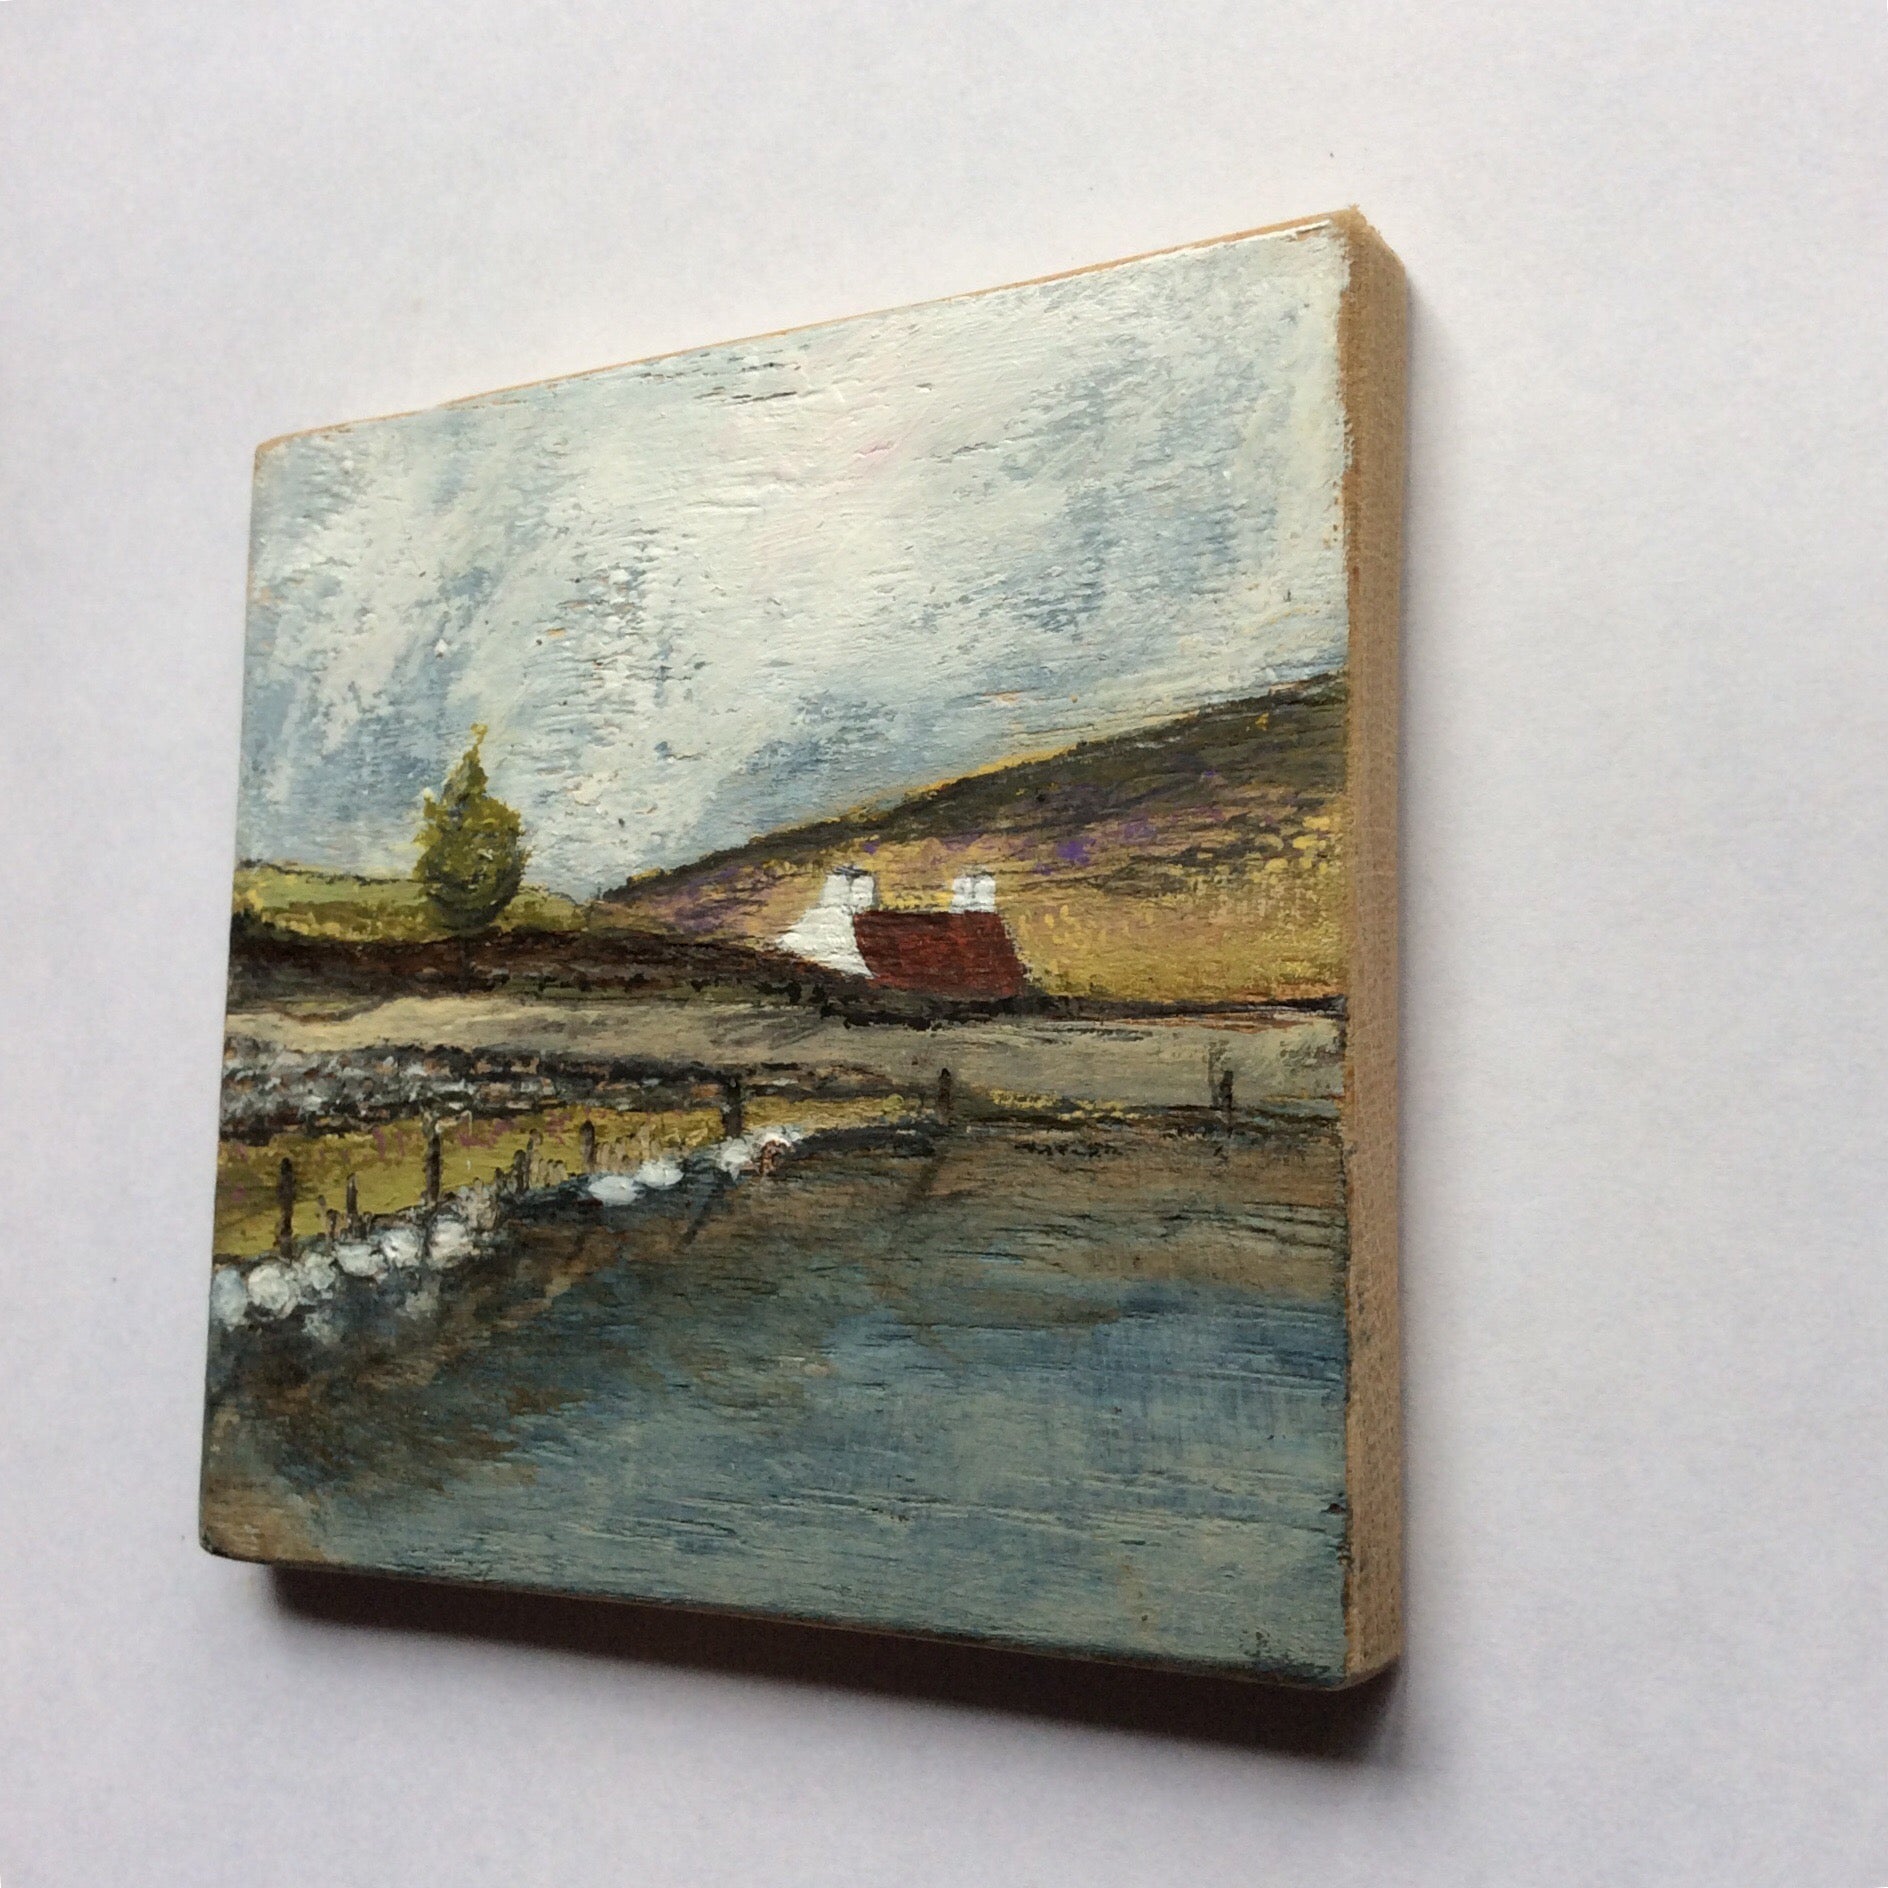 Mixed Media Art on wood By Louise O'Hara - "Stepping stones Along the Tarn”